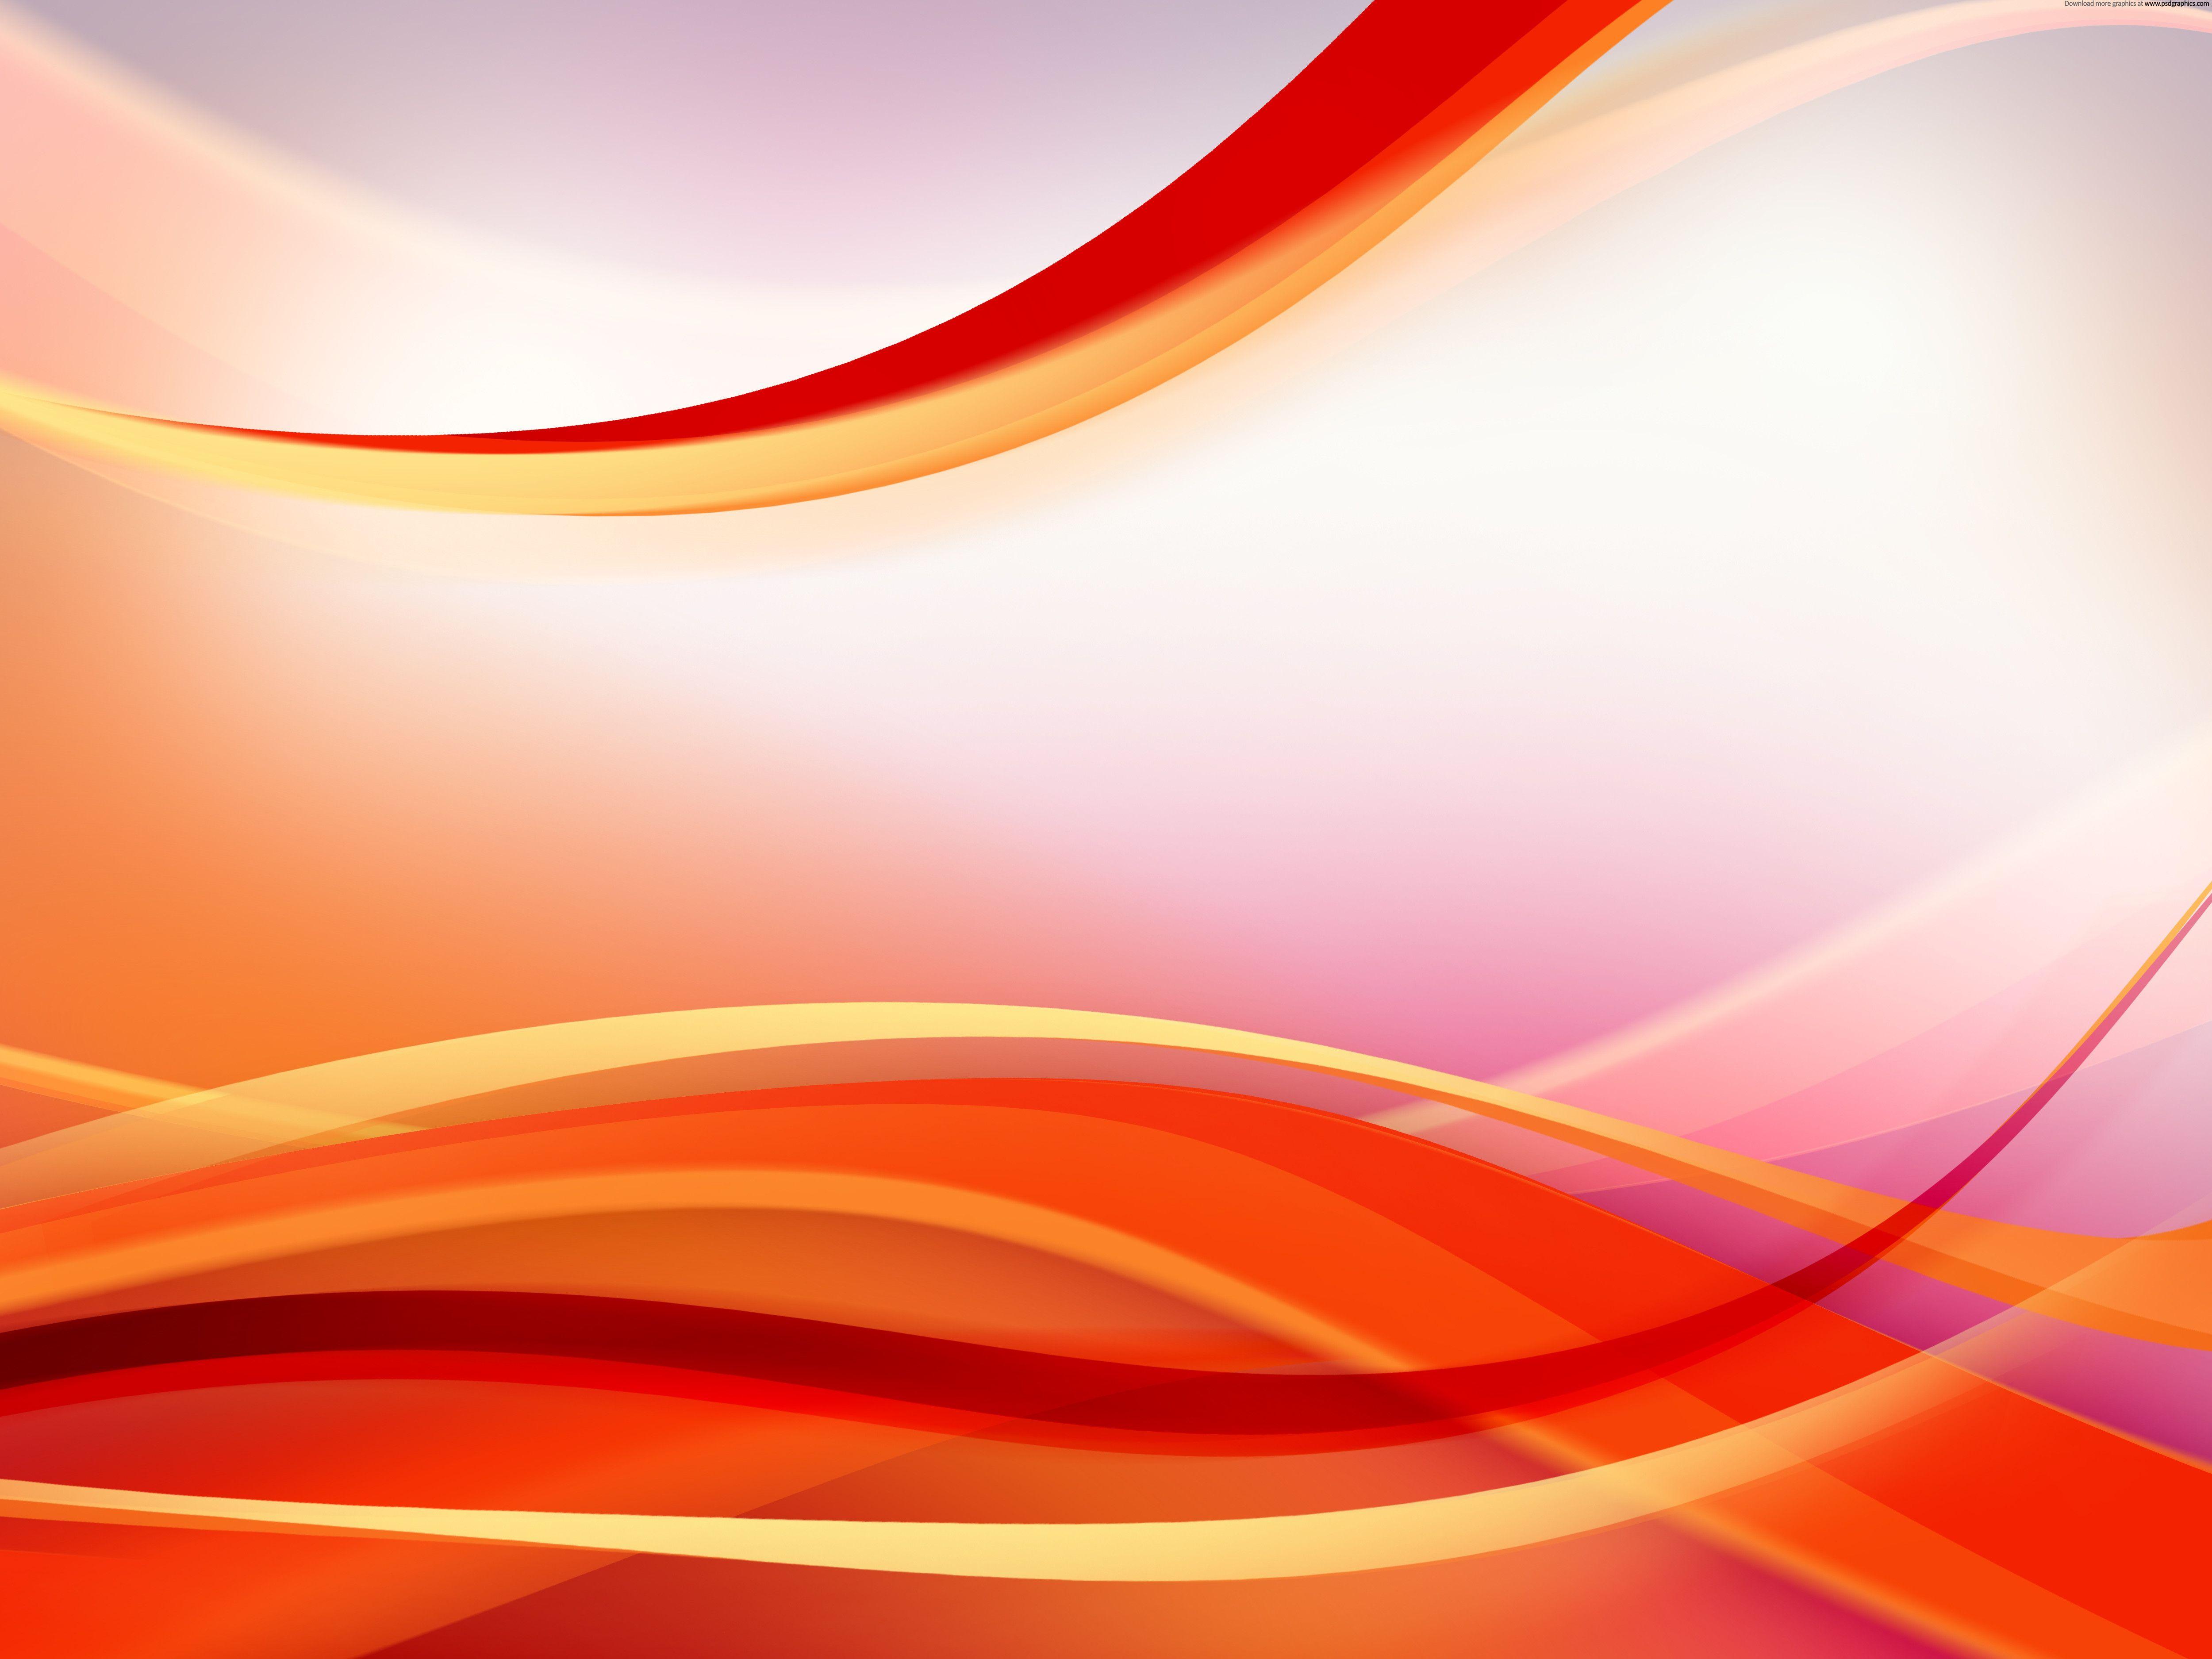 Red and yellow flowing background